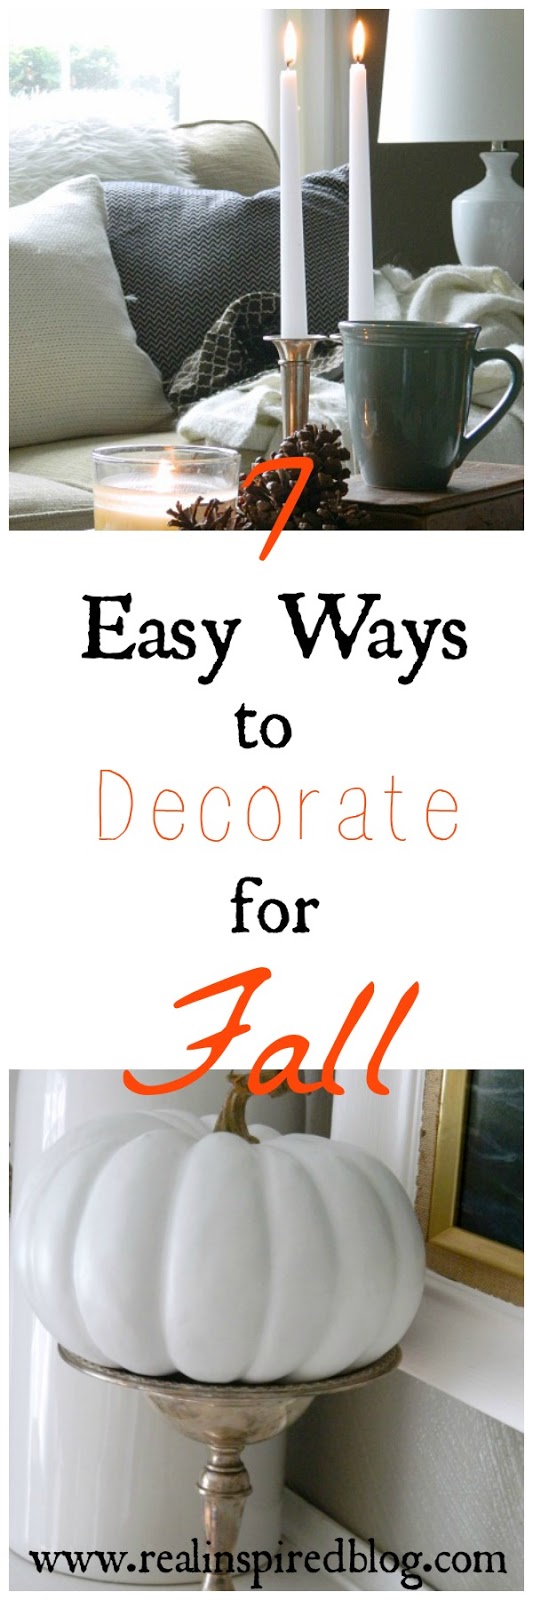 7 Easy Ways to Decorate for Fall